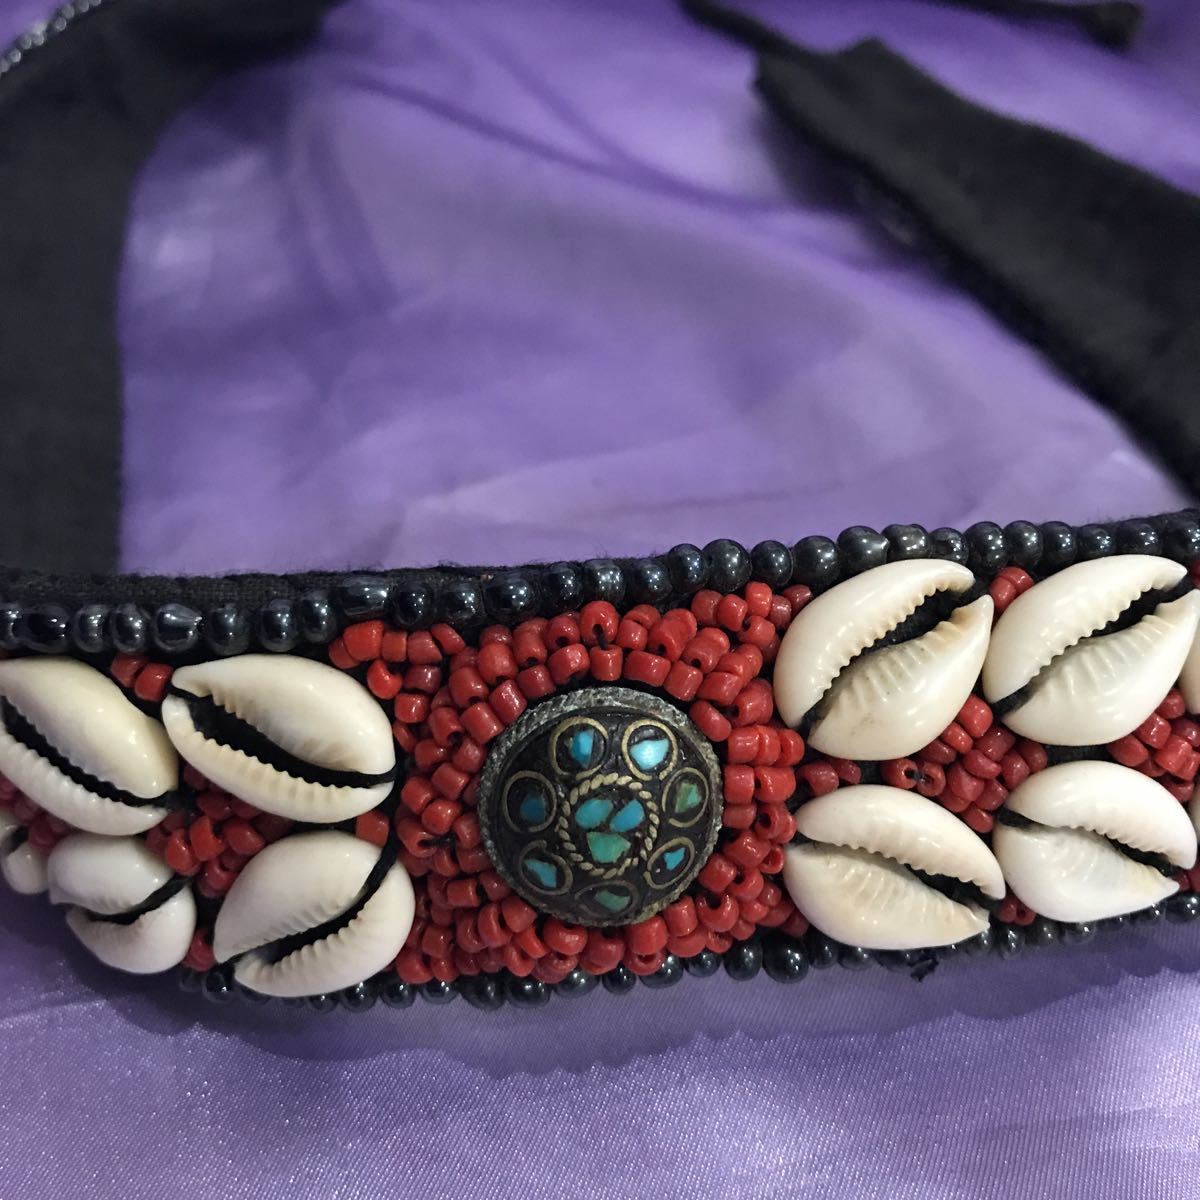  last SALE! rare article * India made * hand made * beads embroidery belt A